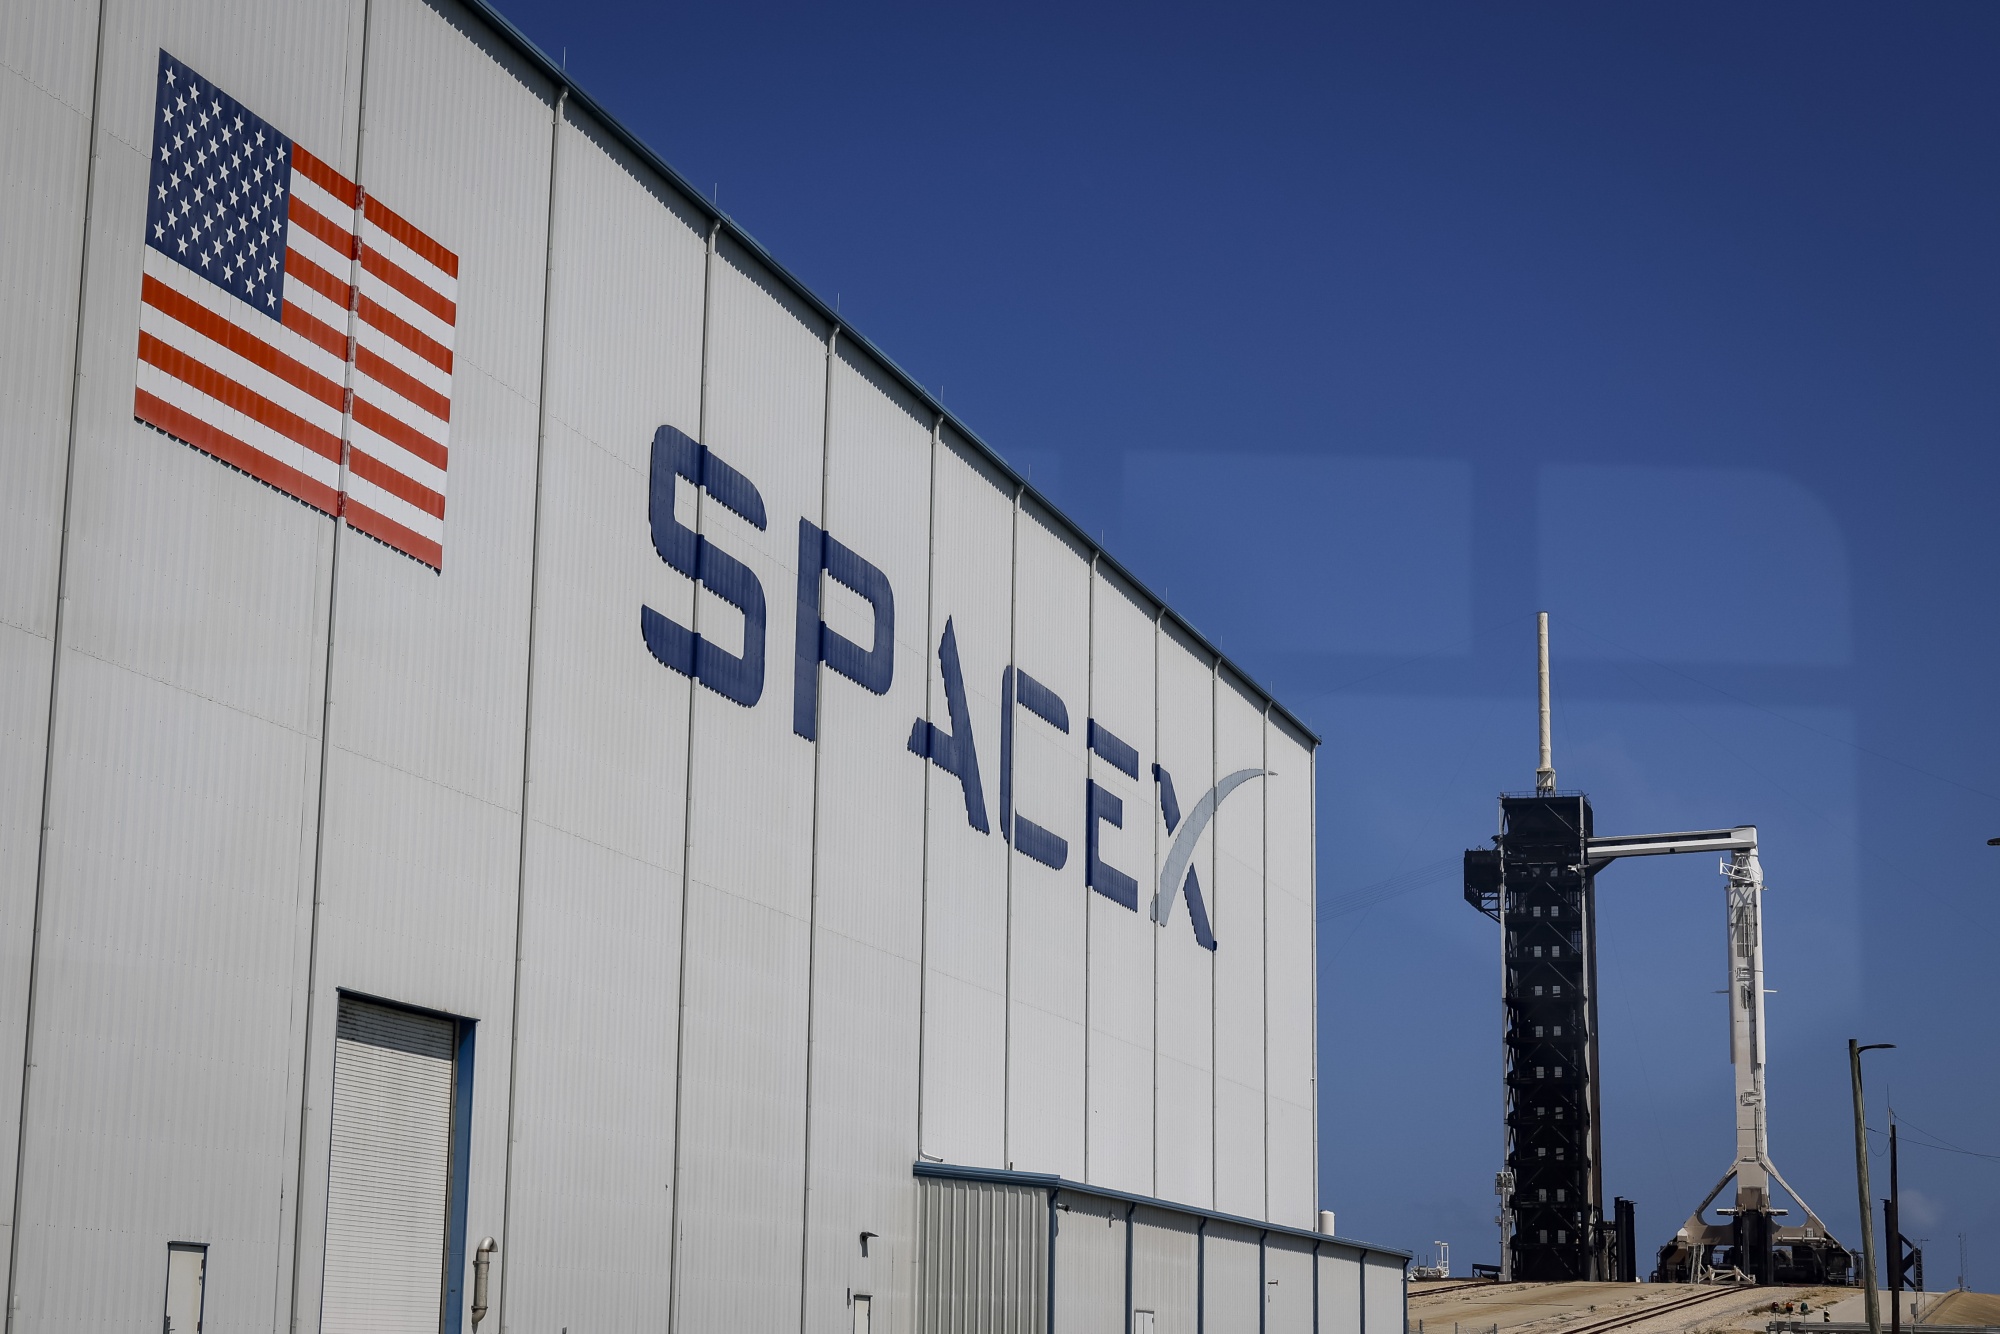 SpaceX expects $15 billion in revenue from Starlink in the upcoming year.